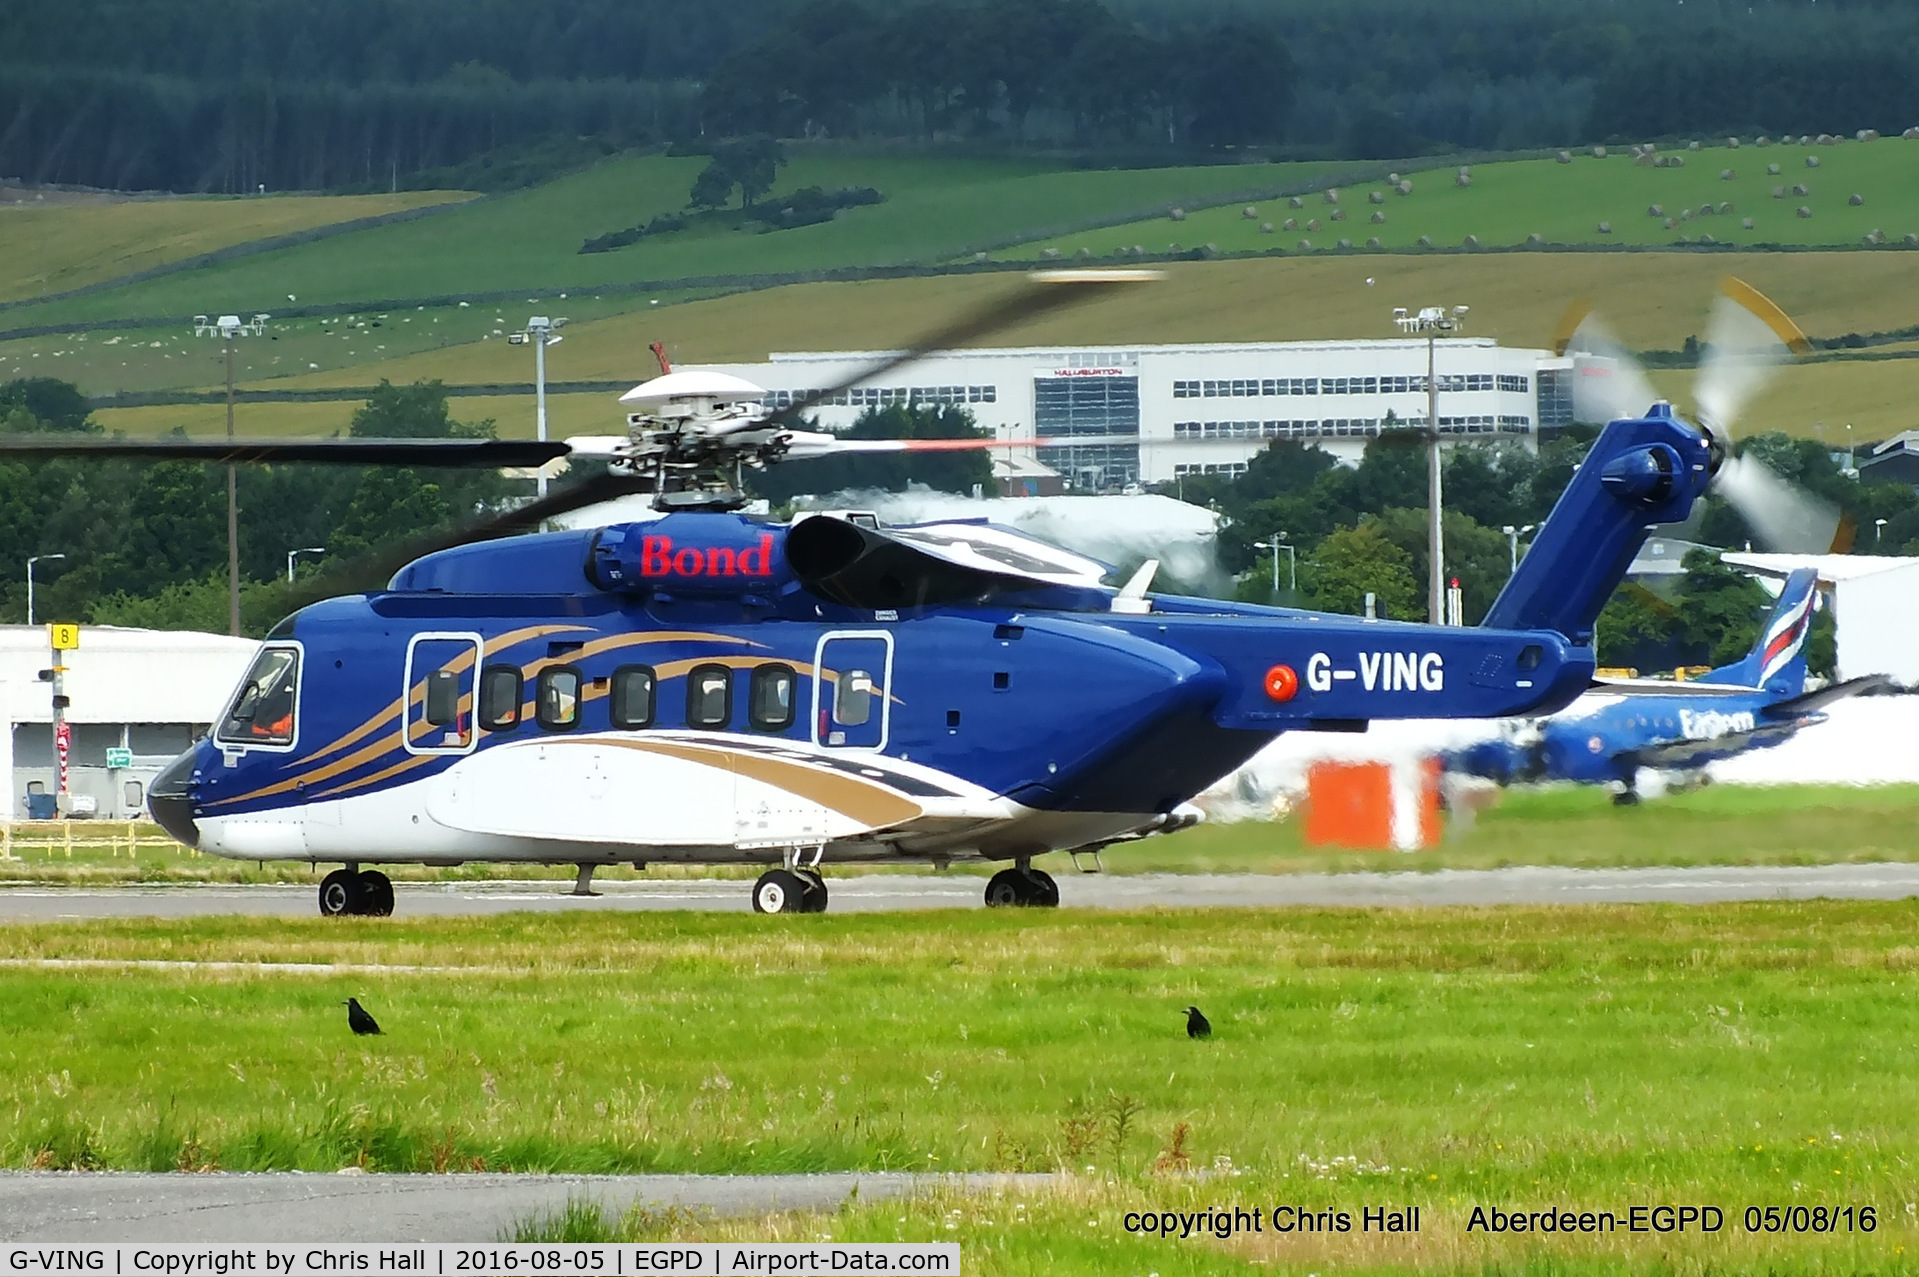 G-VING, 2013 Sikorsky S-92A C/N 920207, Bond Offshore Helicopters